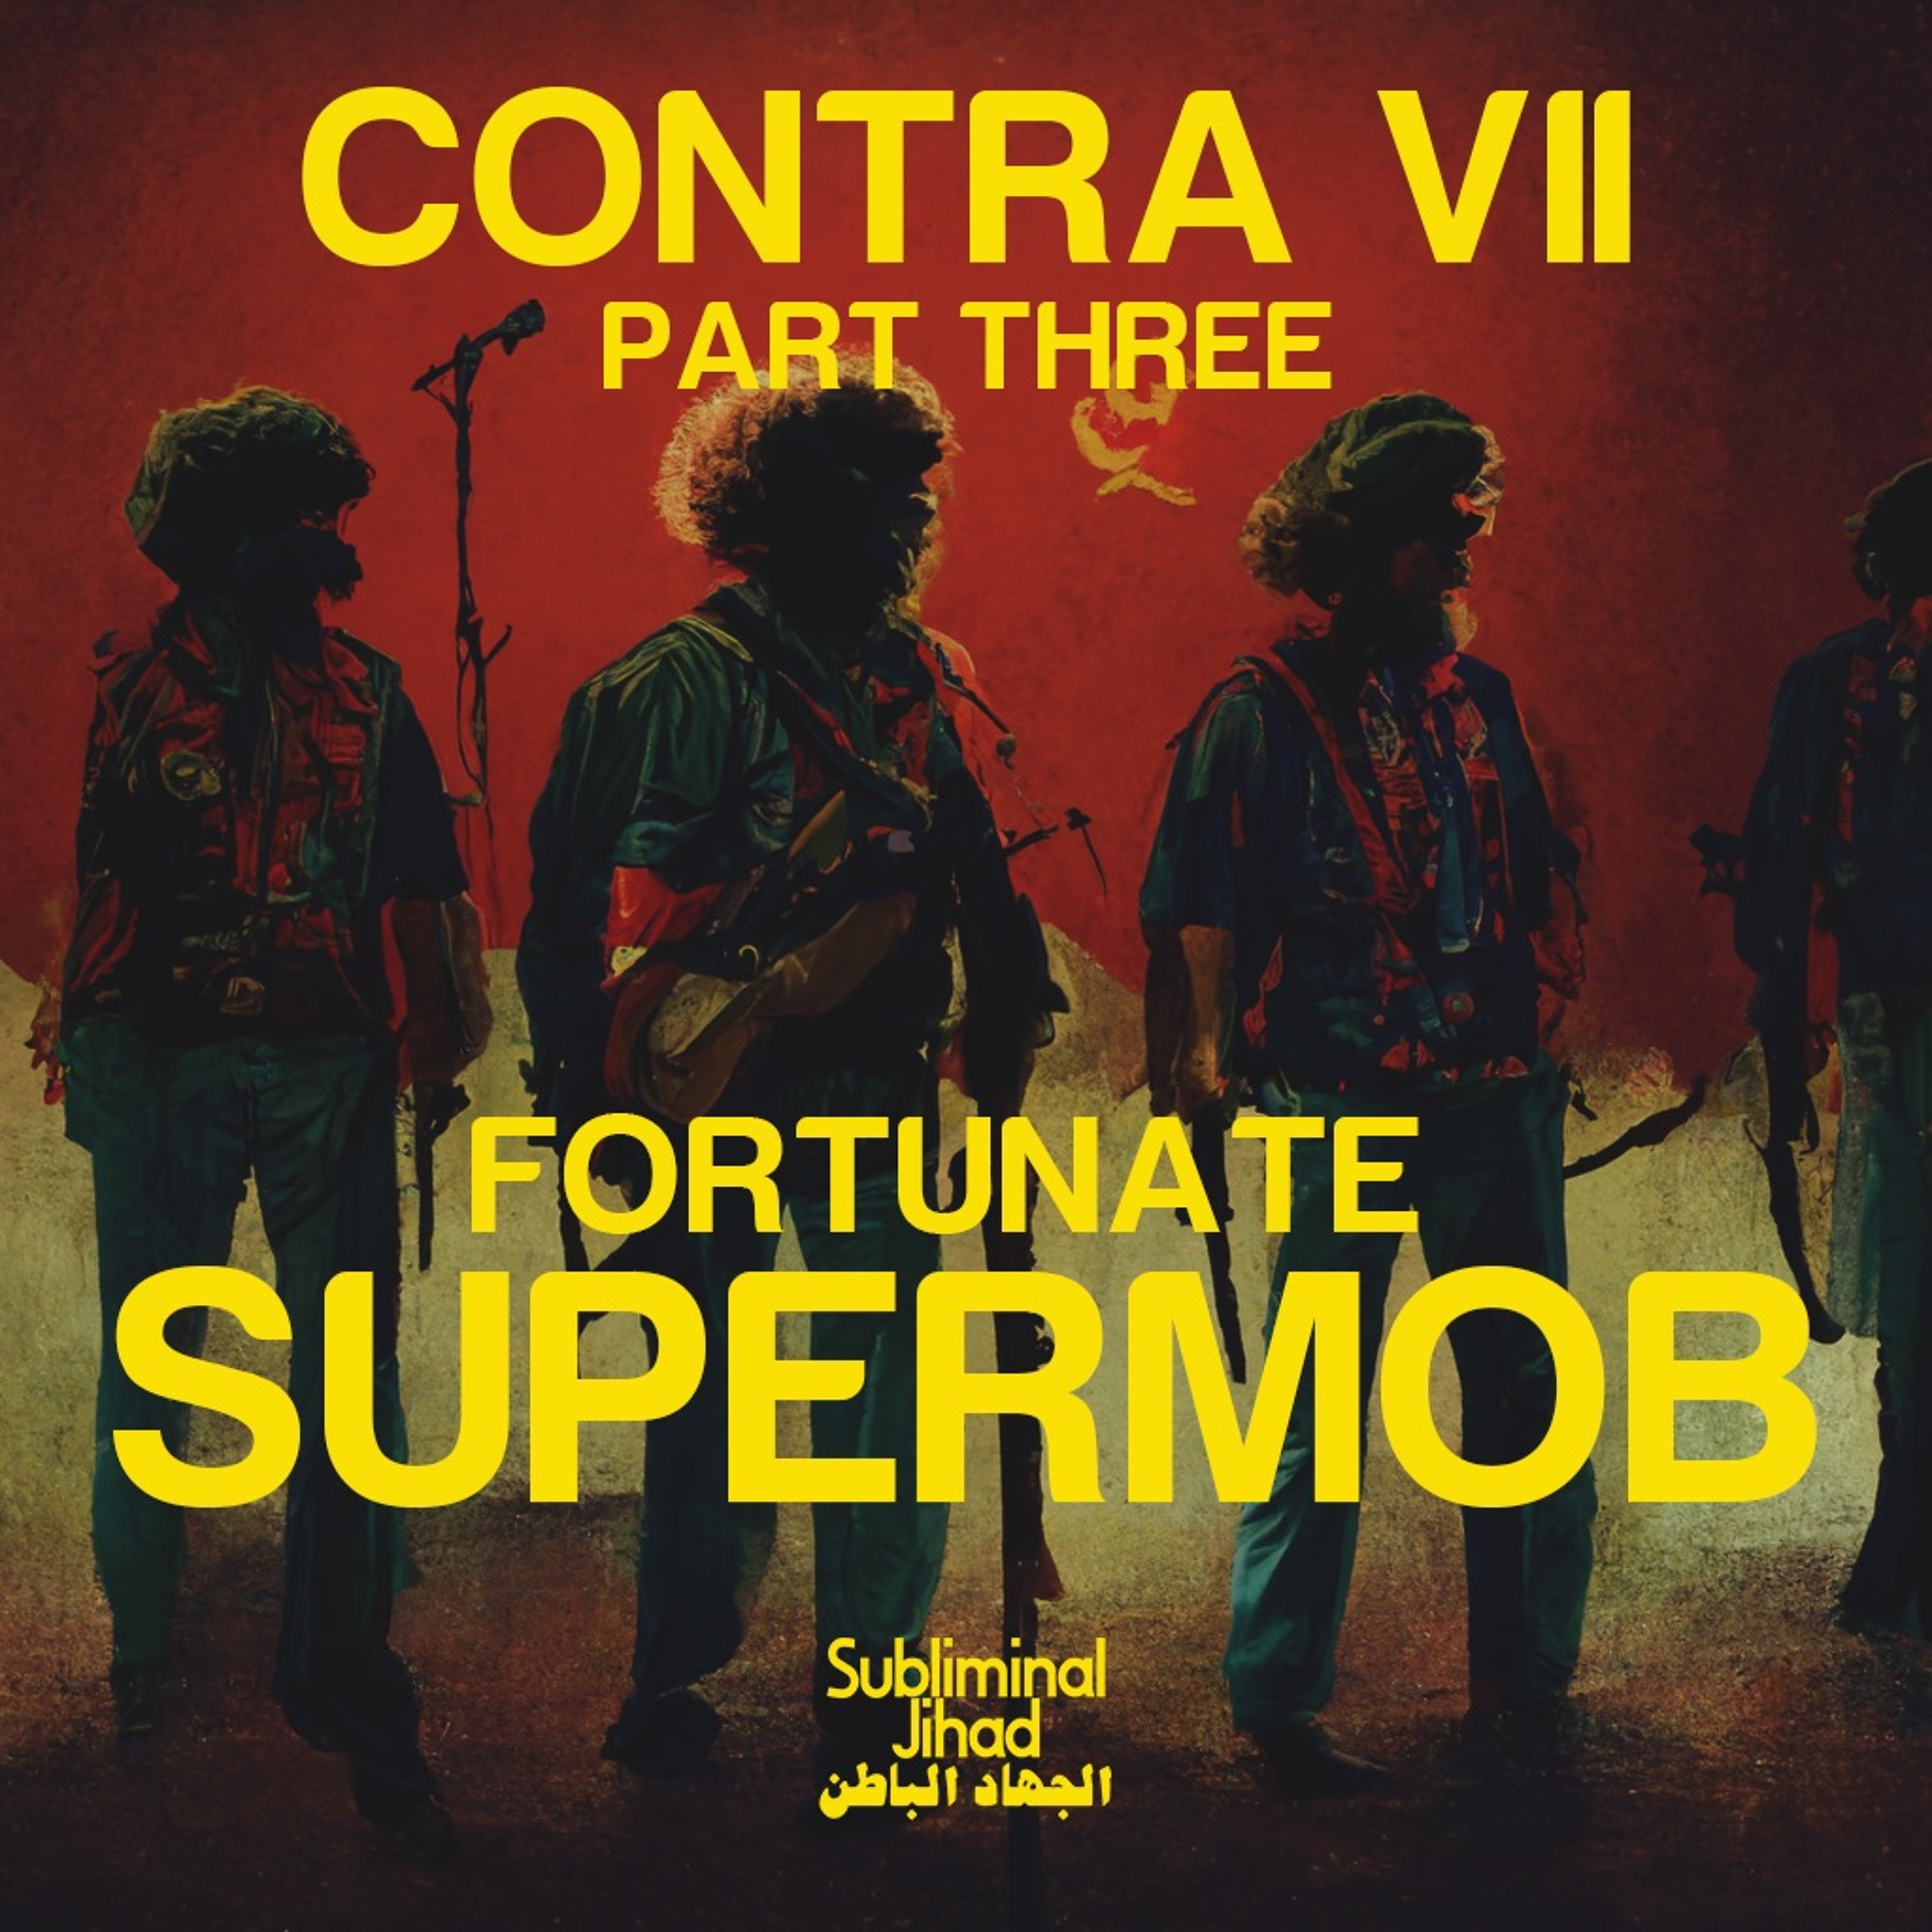 [PREVIEW] #125c - CONTRA VII, Part Three: Fortunate Supermob